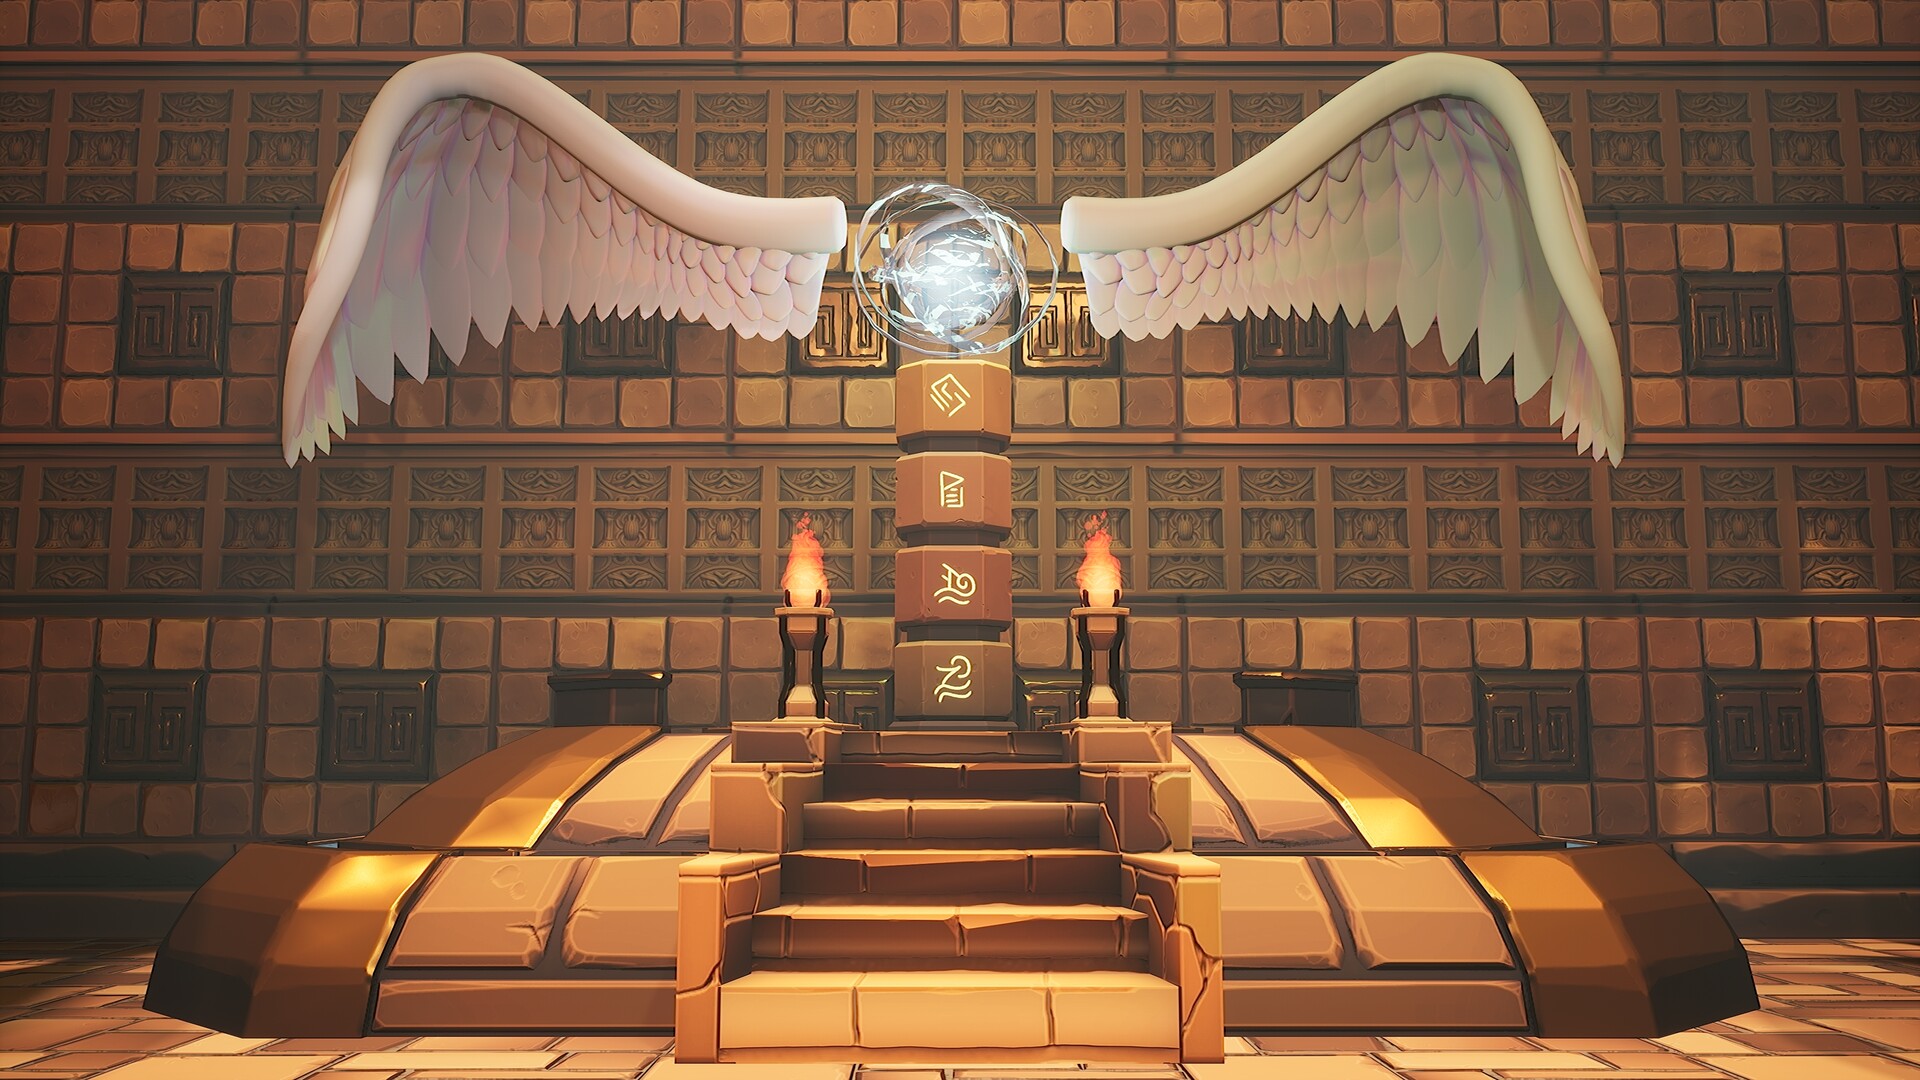 3D model by Tyreece Salkind of a symbolic altar located in a desert temple.